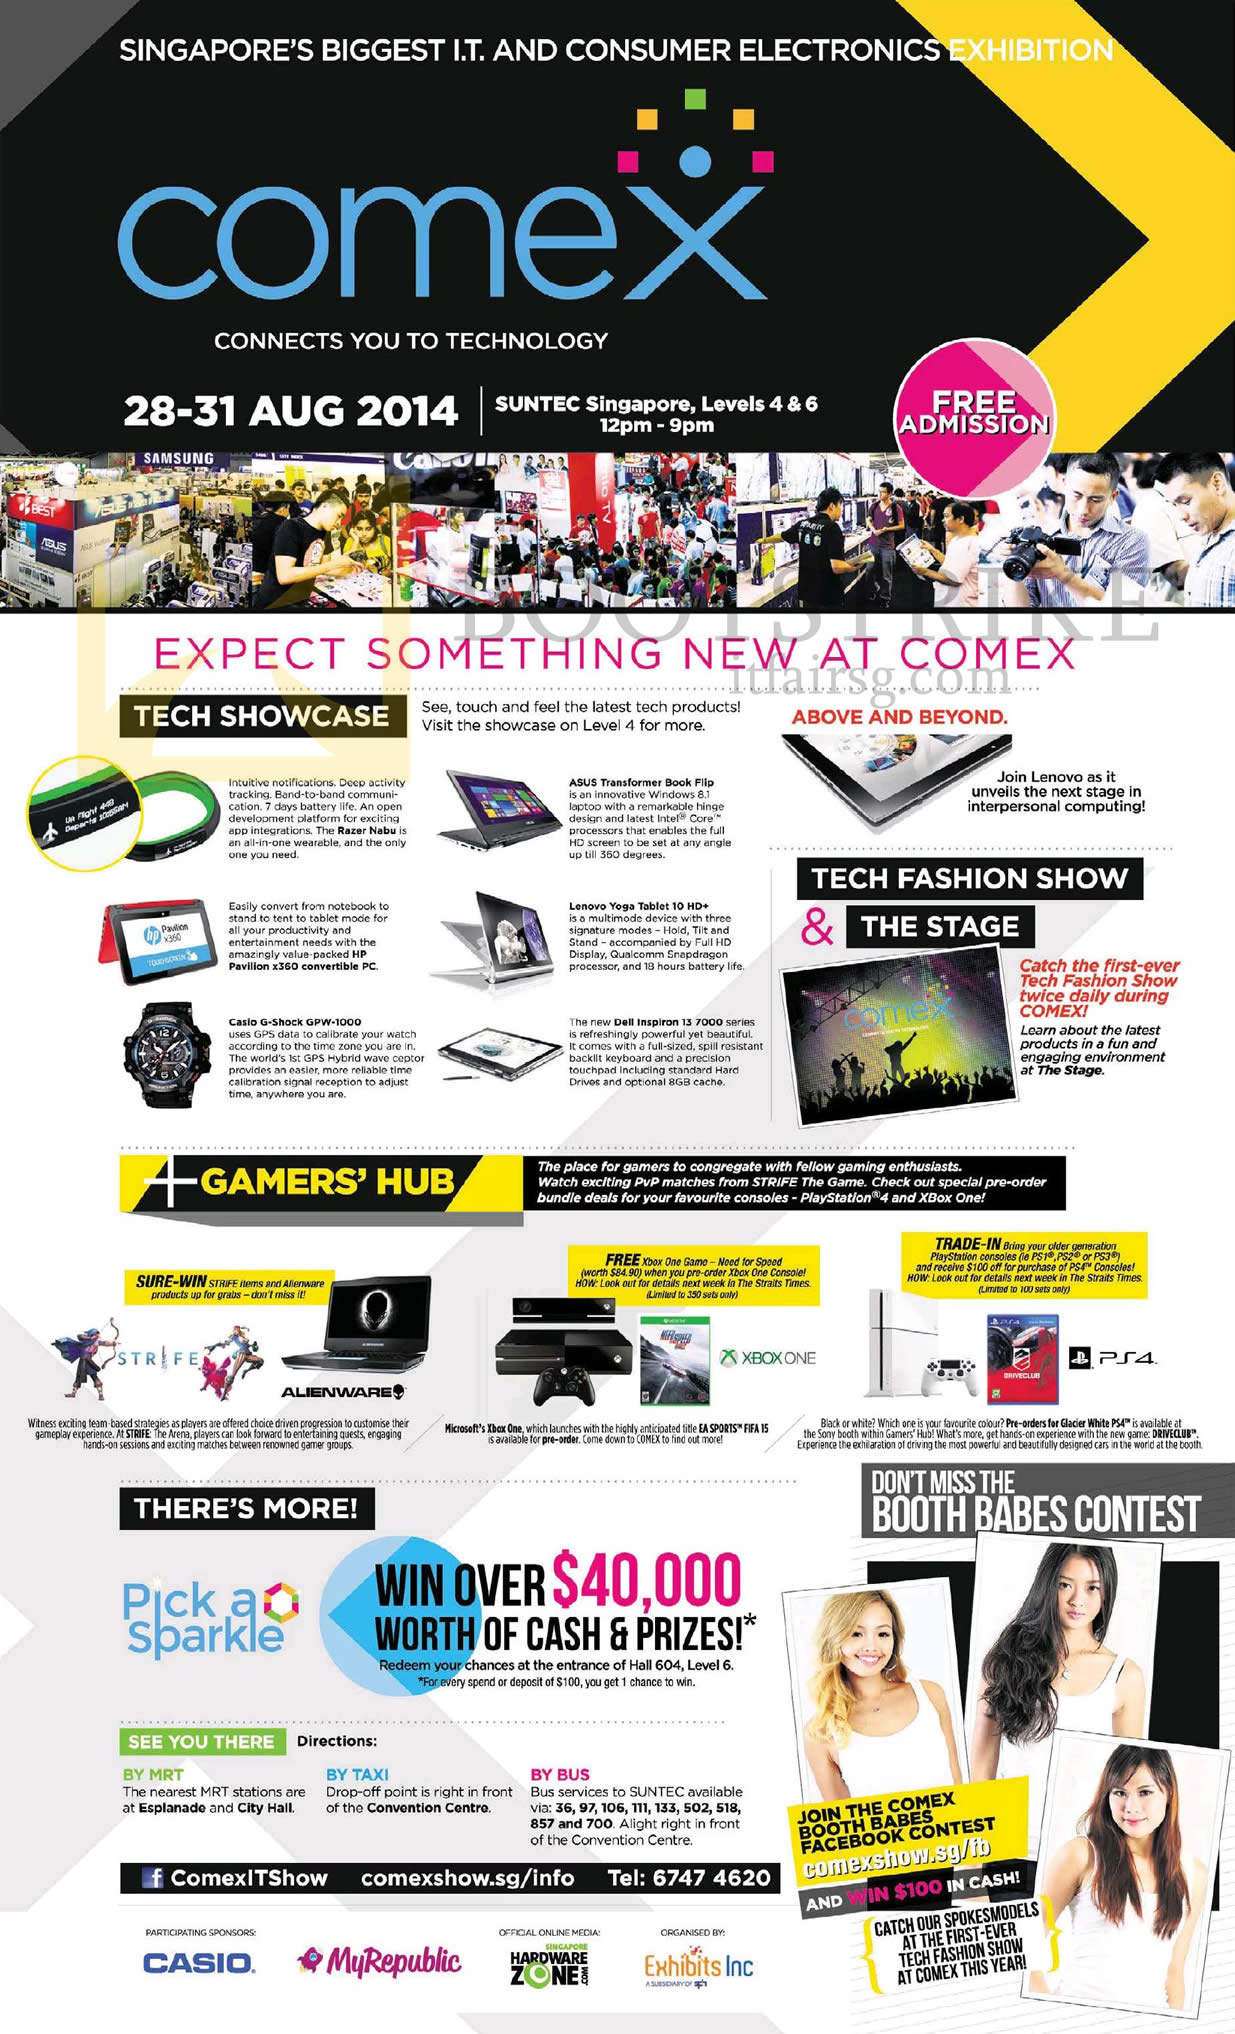 COMEX 2014 price list image brochure of Event Details, Location, Opening Hours, Lucky Draw, Tech Showcase, Tech Fashion Show, Gamers Hub